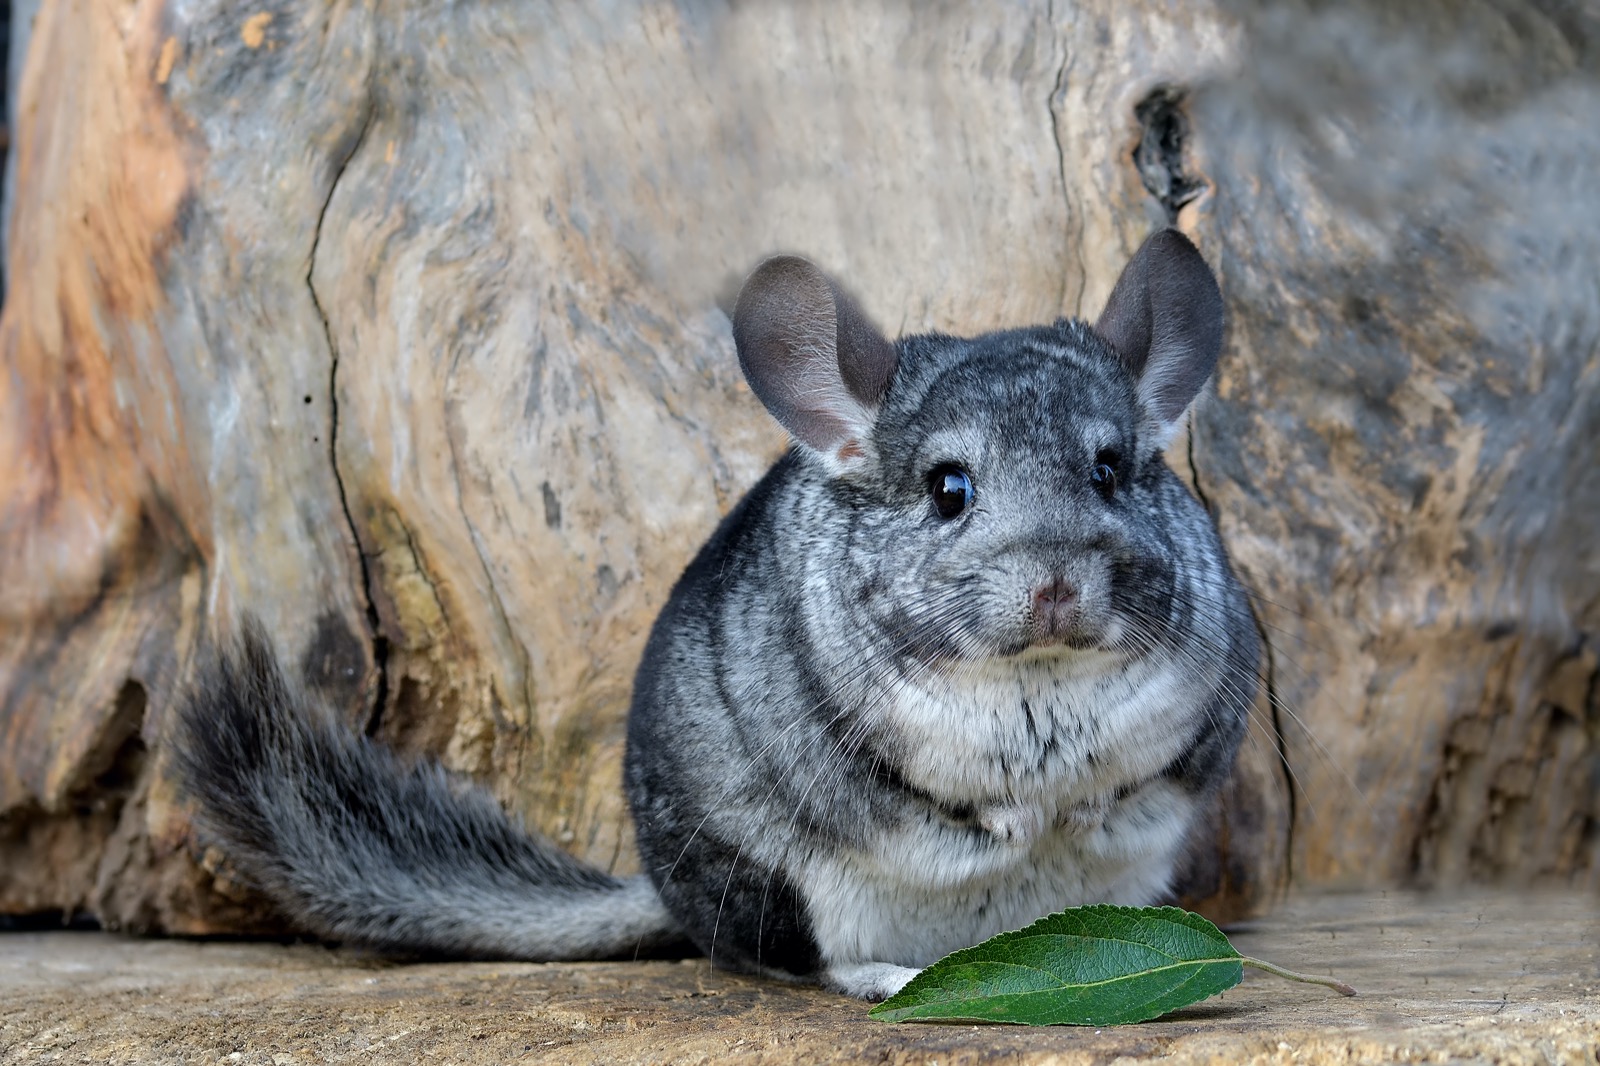 Can You Beat Your Friends in This Quiz That’s All About Animals? Chinchilla